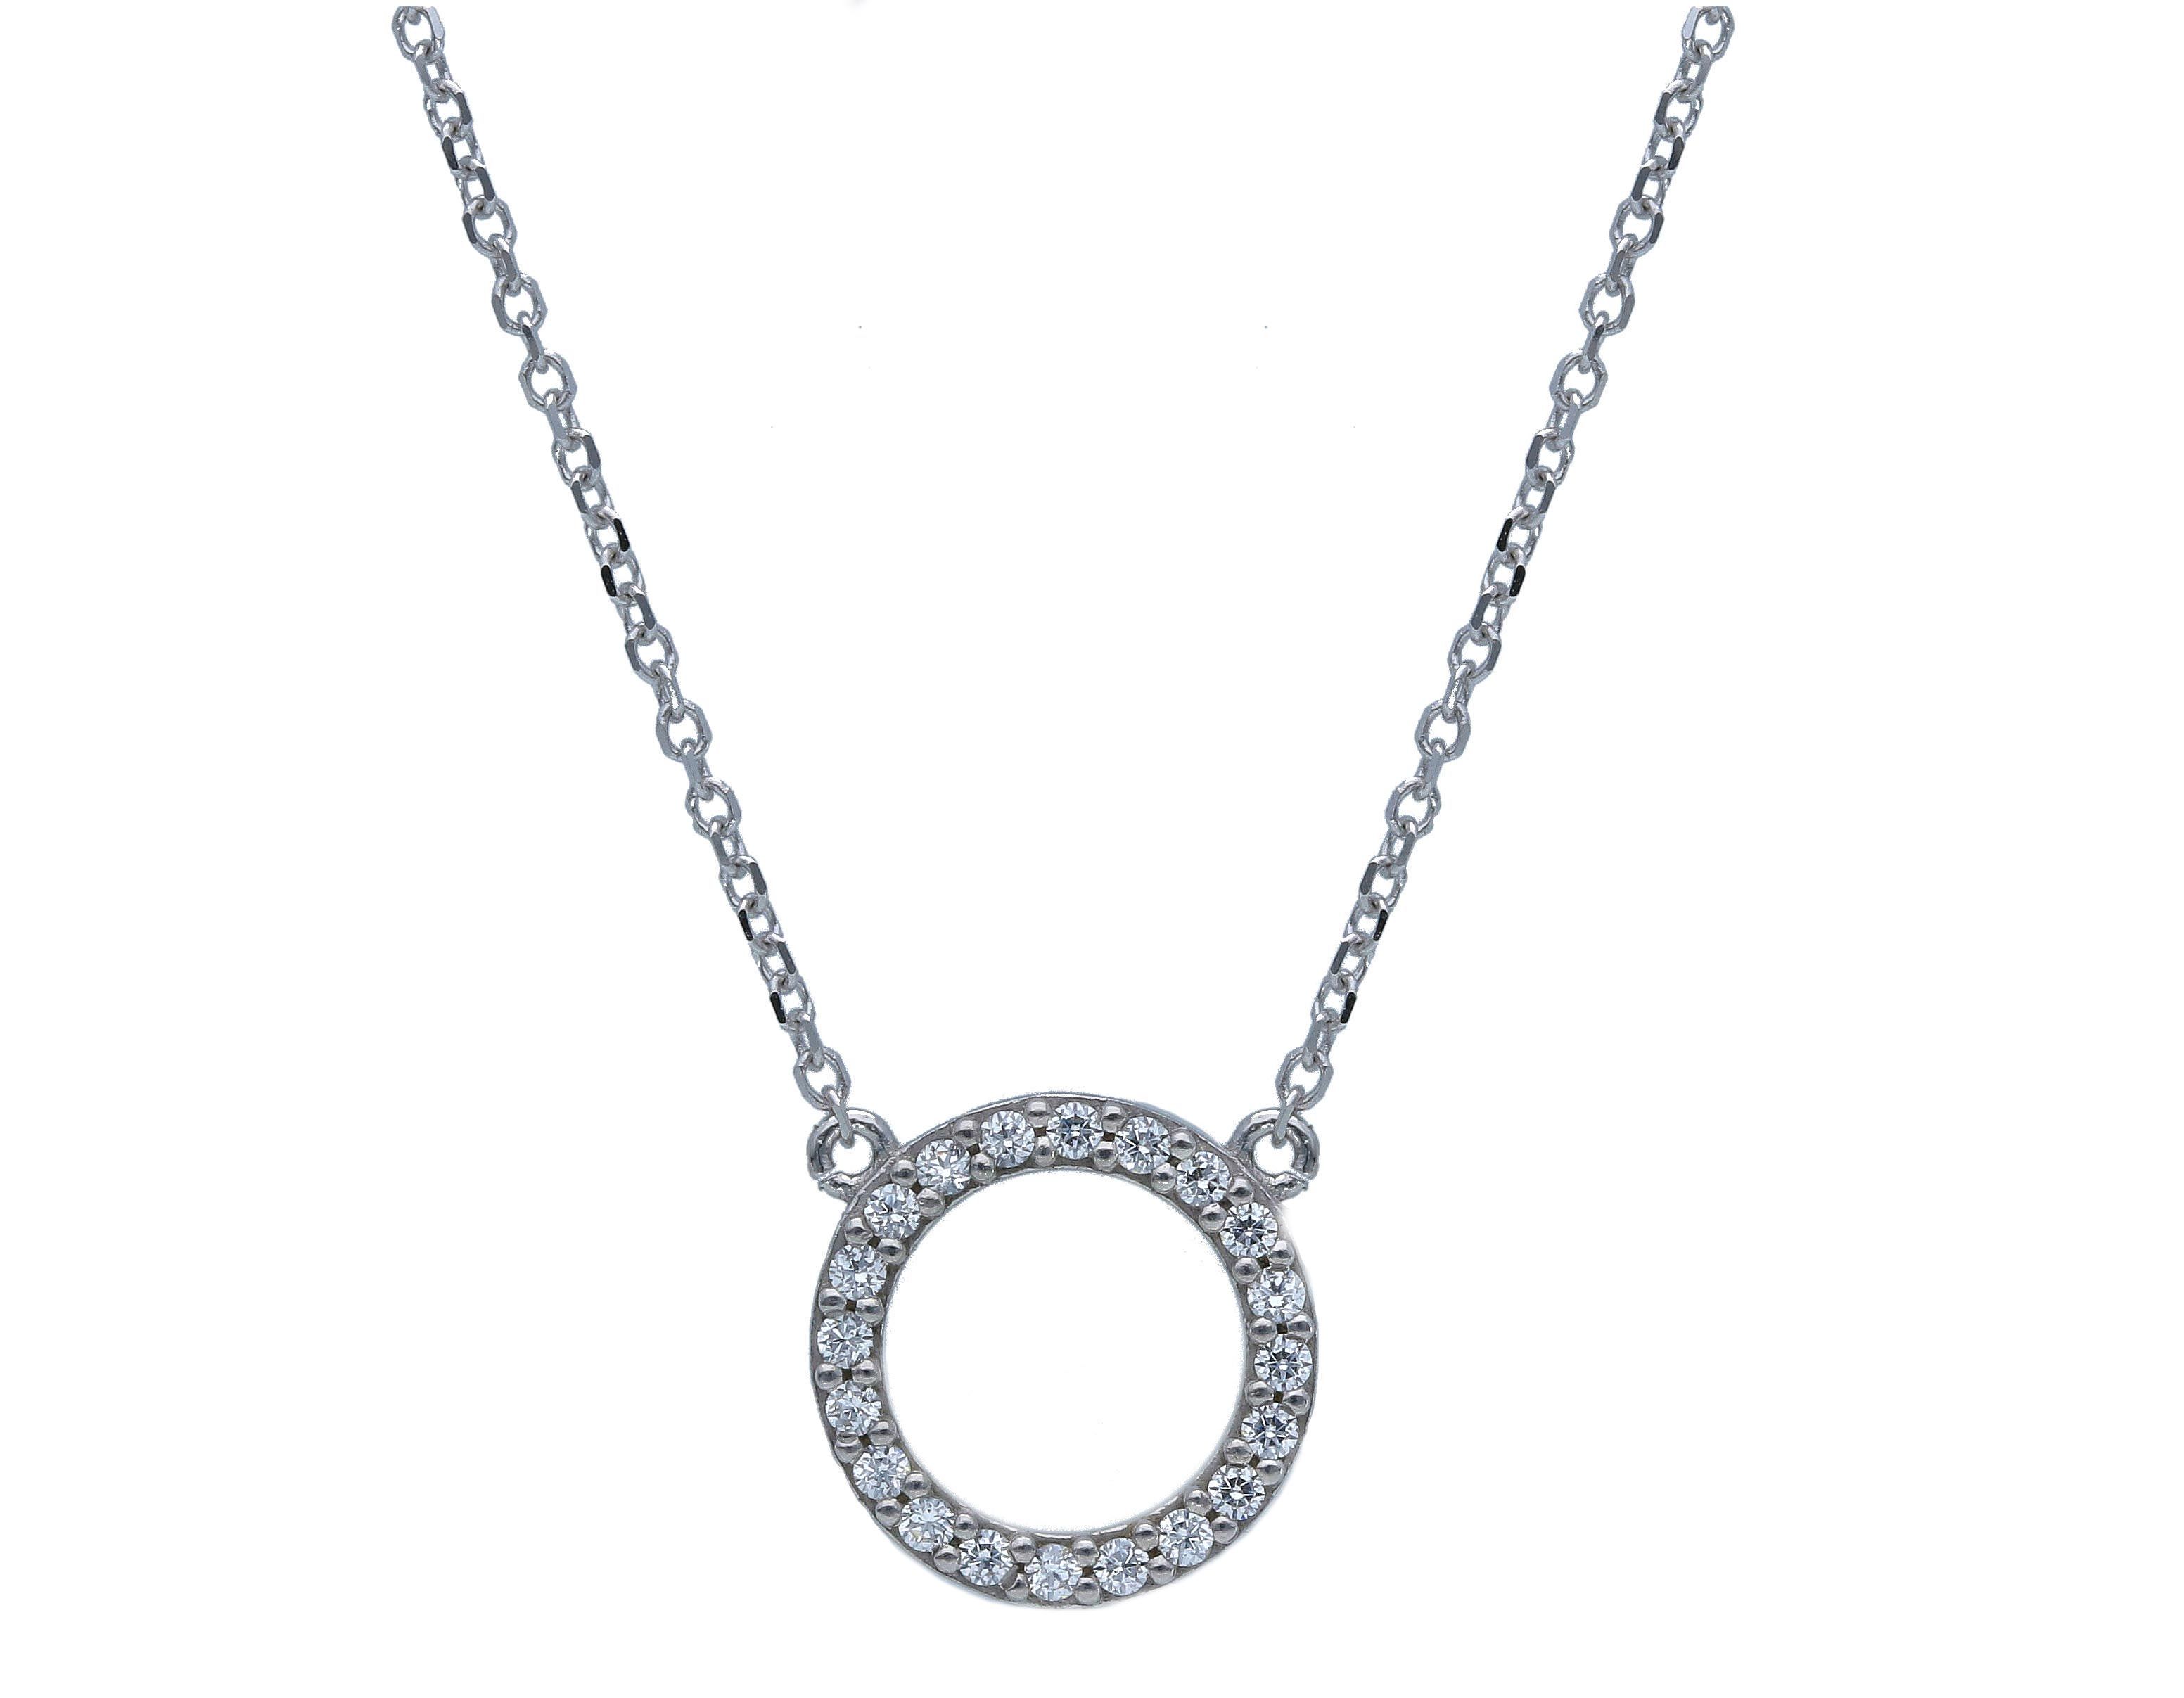 White gold necklace k9 with zircons (code S261996)